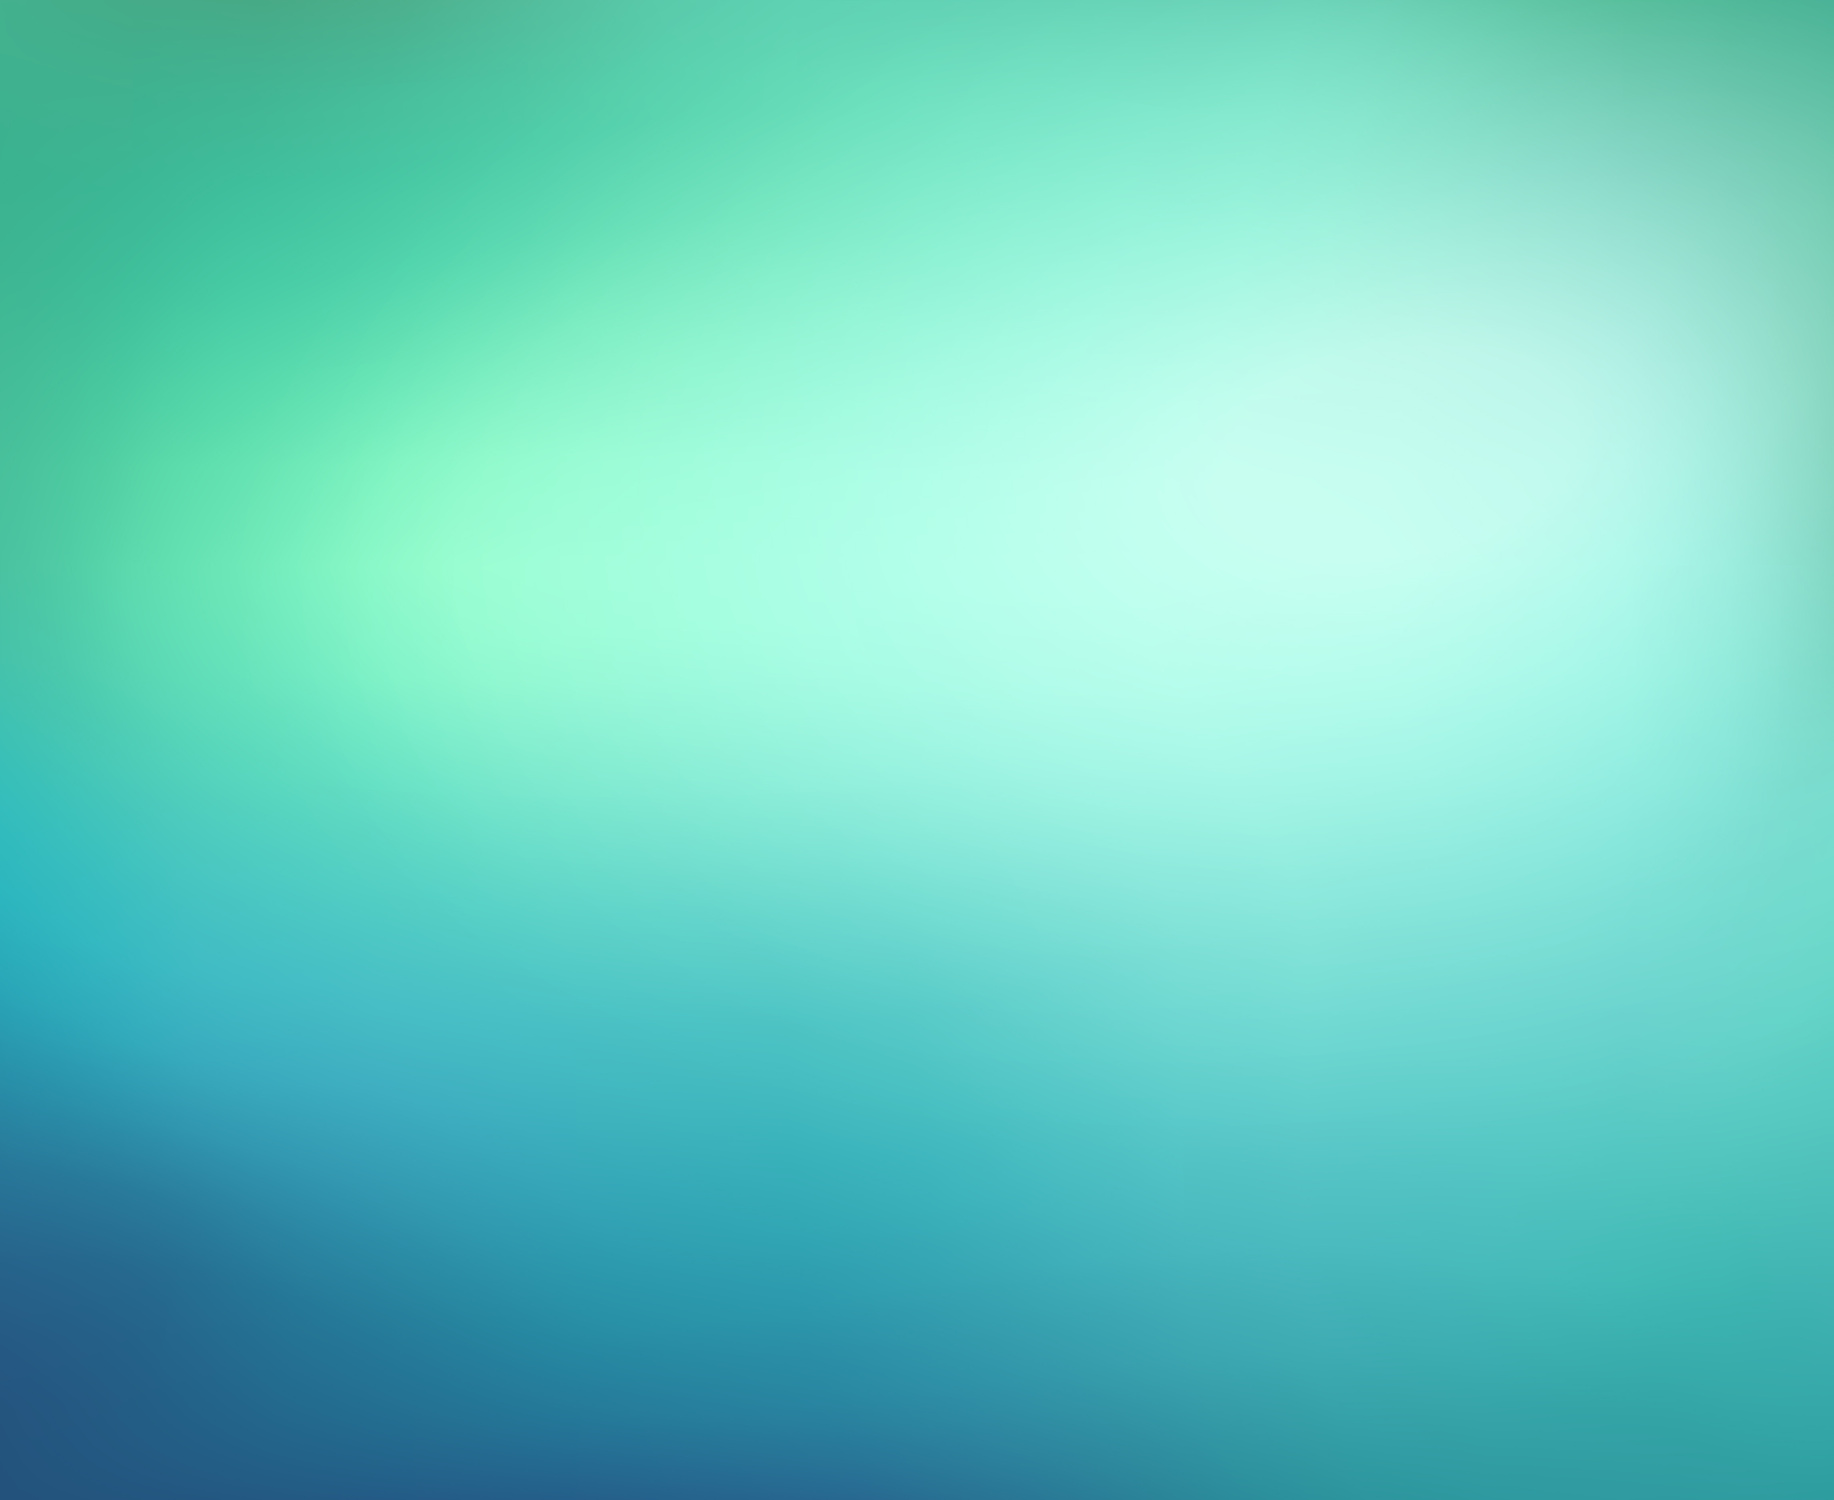 Green and Teal Gradient background